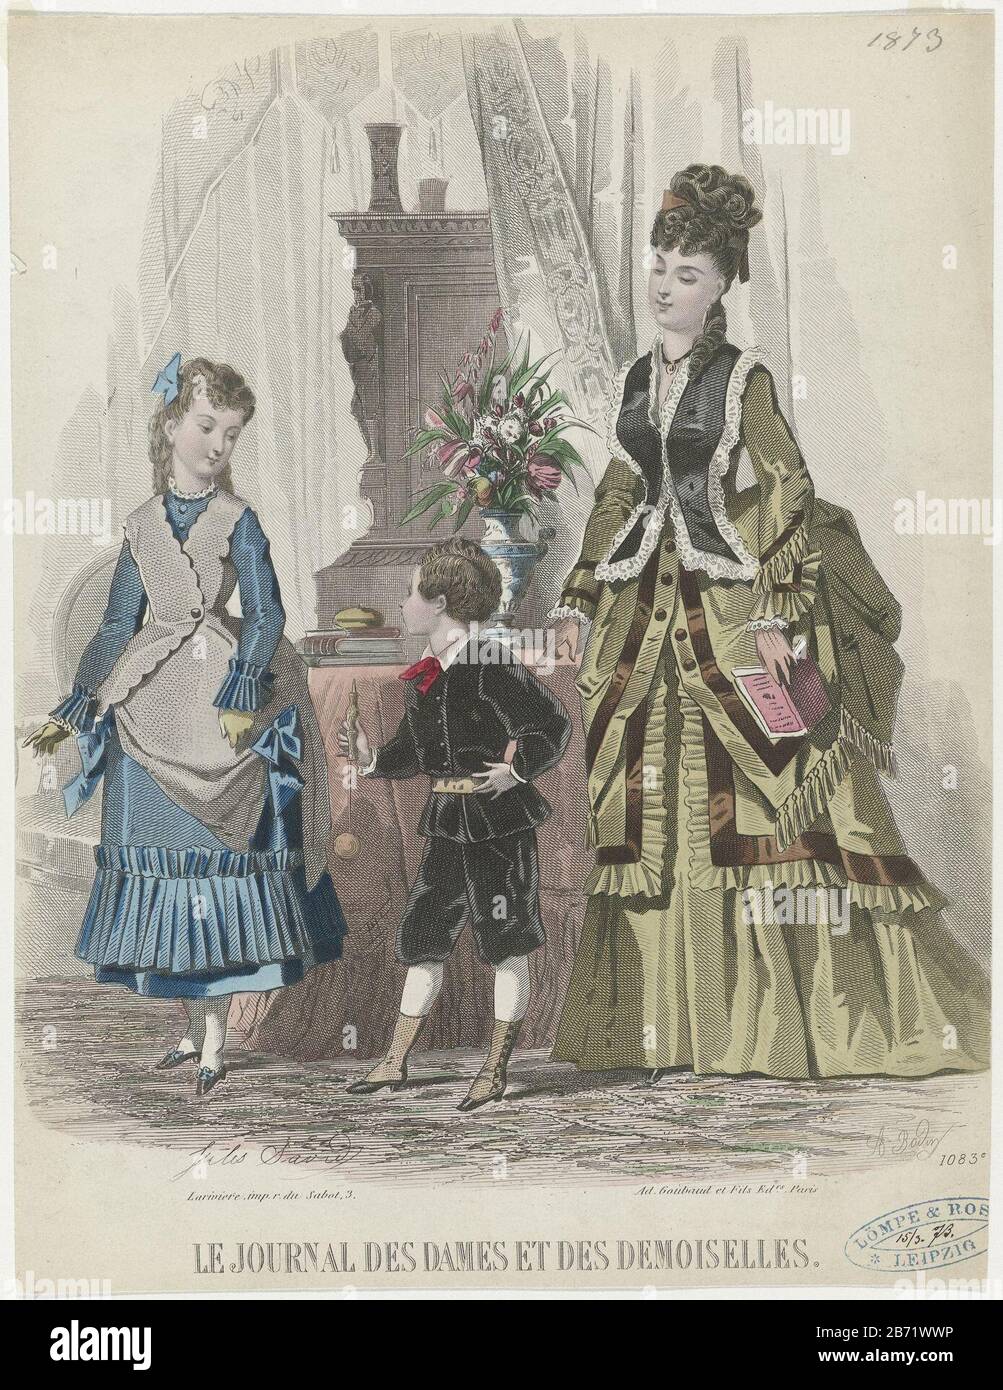 Le Journal des Dames et des Demoiselles, 1872-1873, No 1083c a woman and two children in the interior, the woman is wearing a dress of faille, with a waistcoat in black satin with white lace. The girl is wearing a gown of blue taffeta with pleated flounce at the skirt. Over it a 'polonaise' gray cashmere. The boy is wearing a jacket with a lap and three-quarter pants with a black velvet belt. Details of the dress on page 183 DESCRIPTION DE LA CARVING THE MODES COLORIÉE.Prent from the fashion magazine Journal des Dames et des Demoiselles (1841-1902) . Manufacturer : printmaker A. Bodin (listed Stock Photo